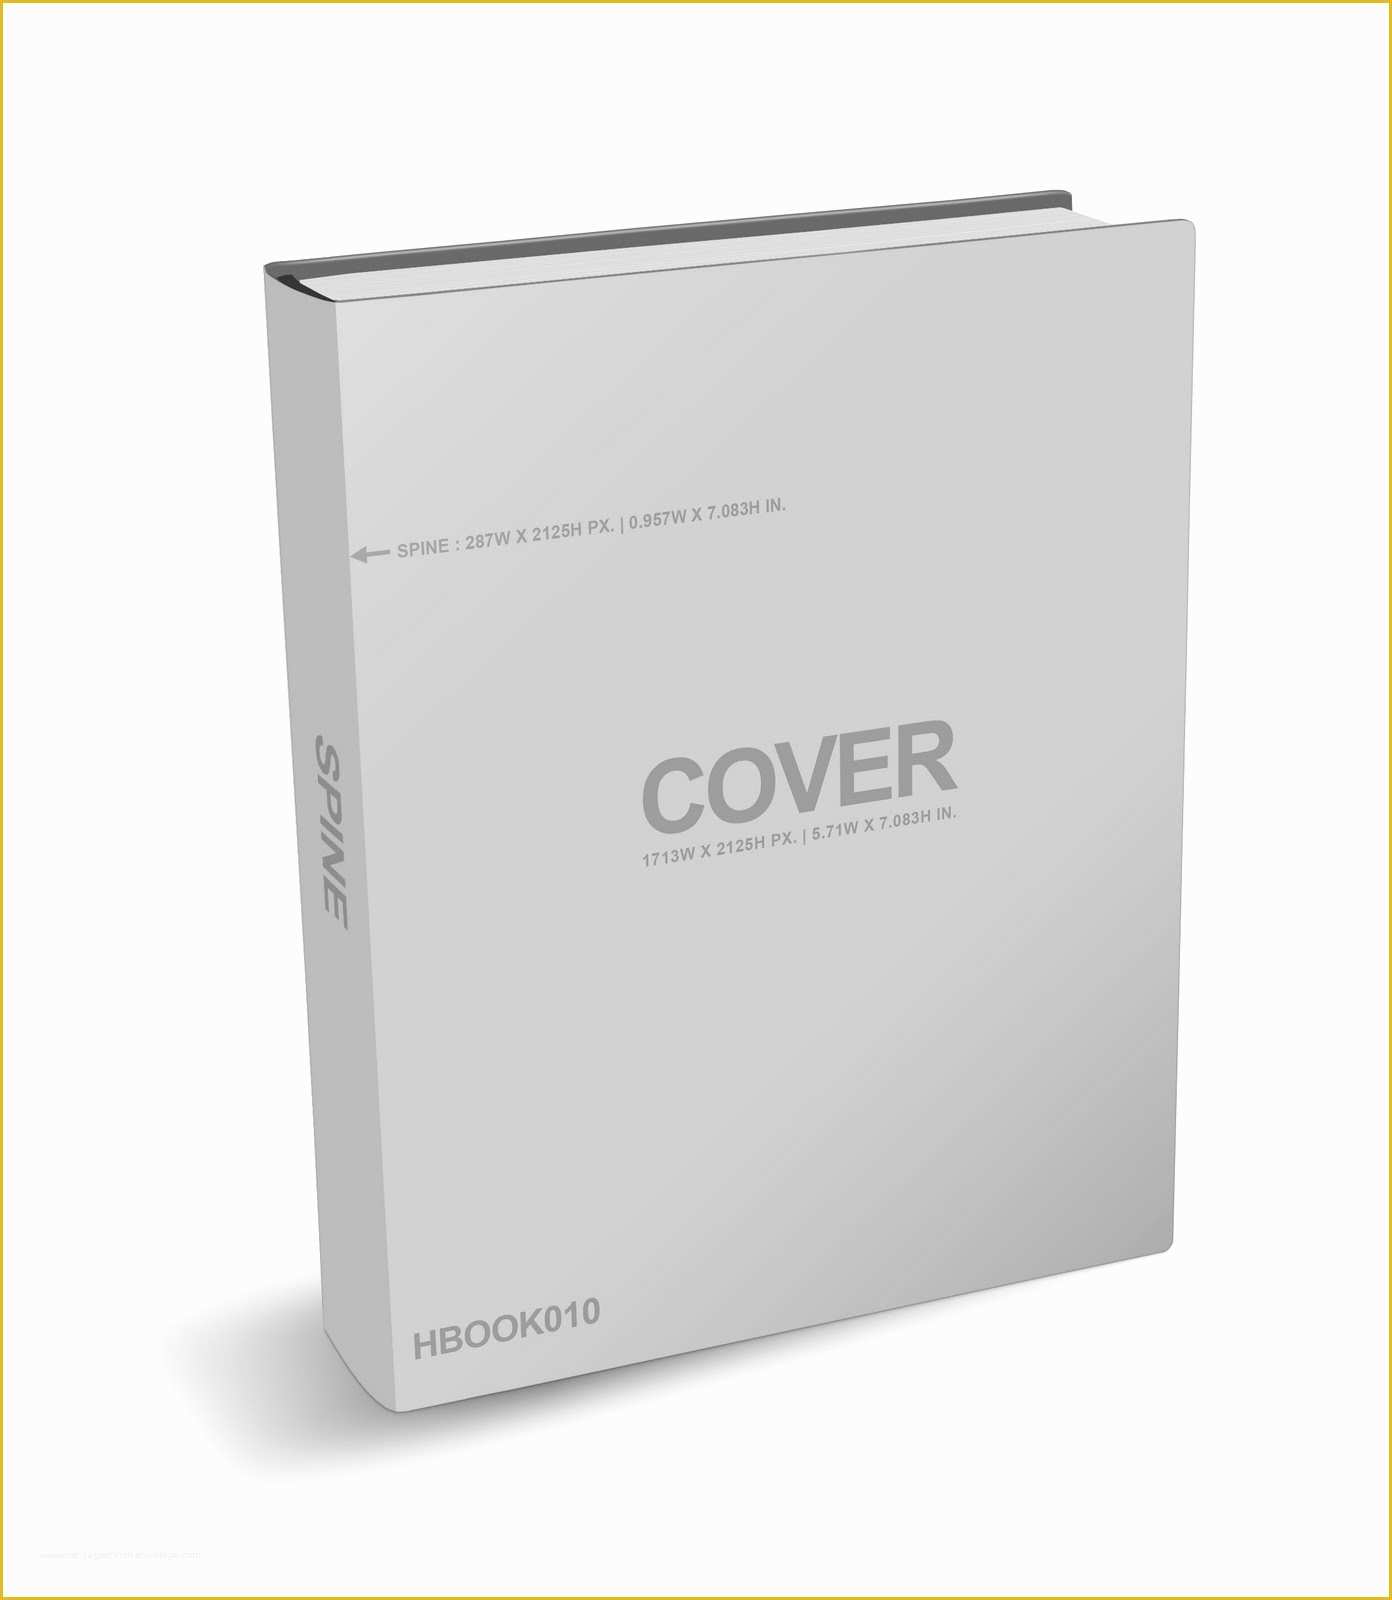 Free Ebook Cover Templates for Photoshop Of Velocity Ebook Covers Ebook Hardcover Templates